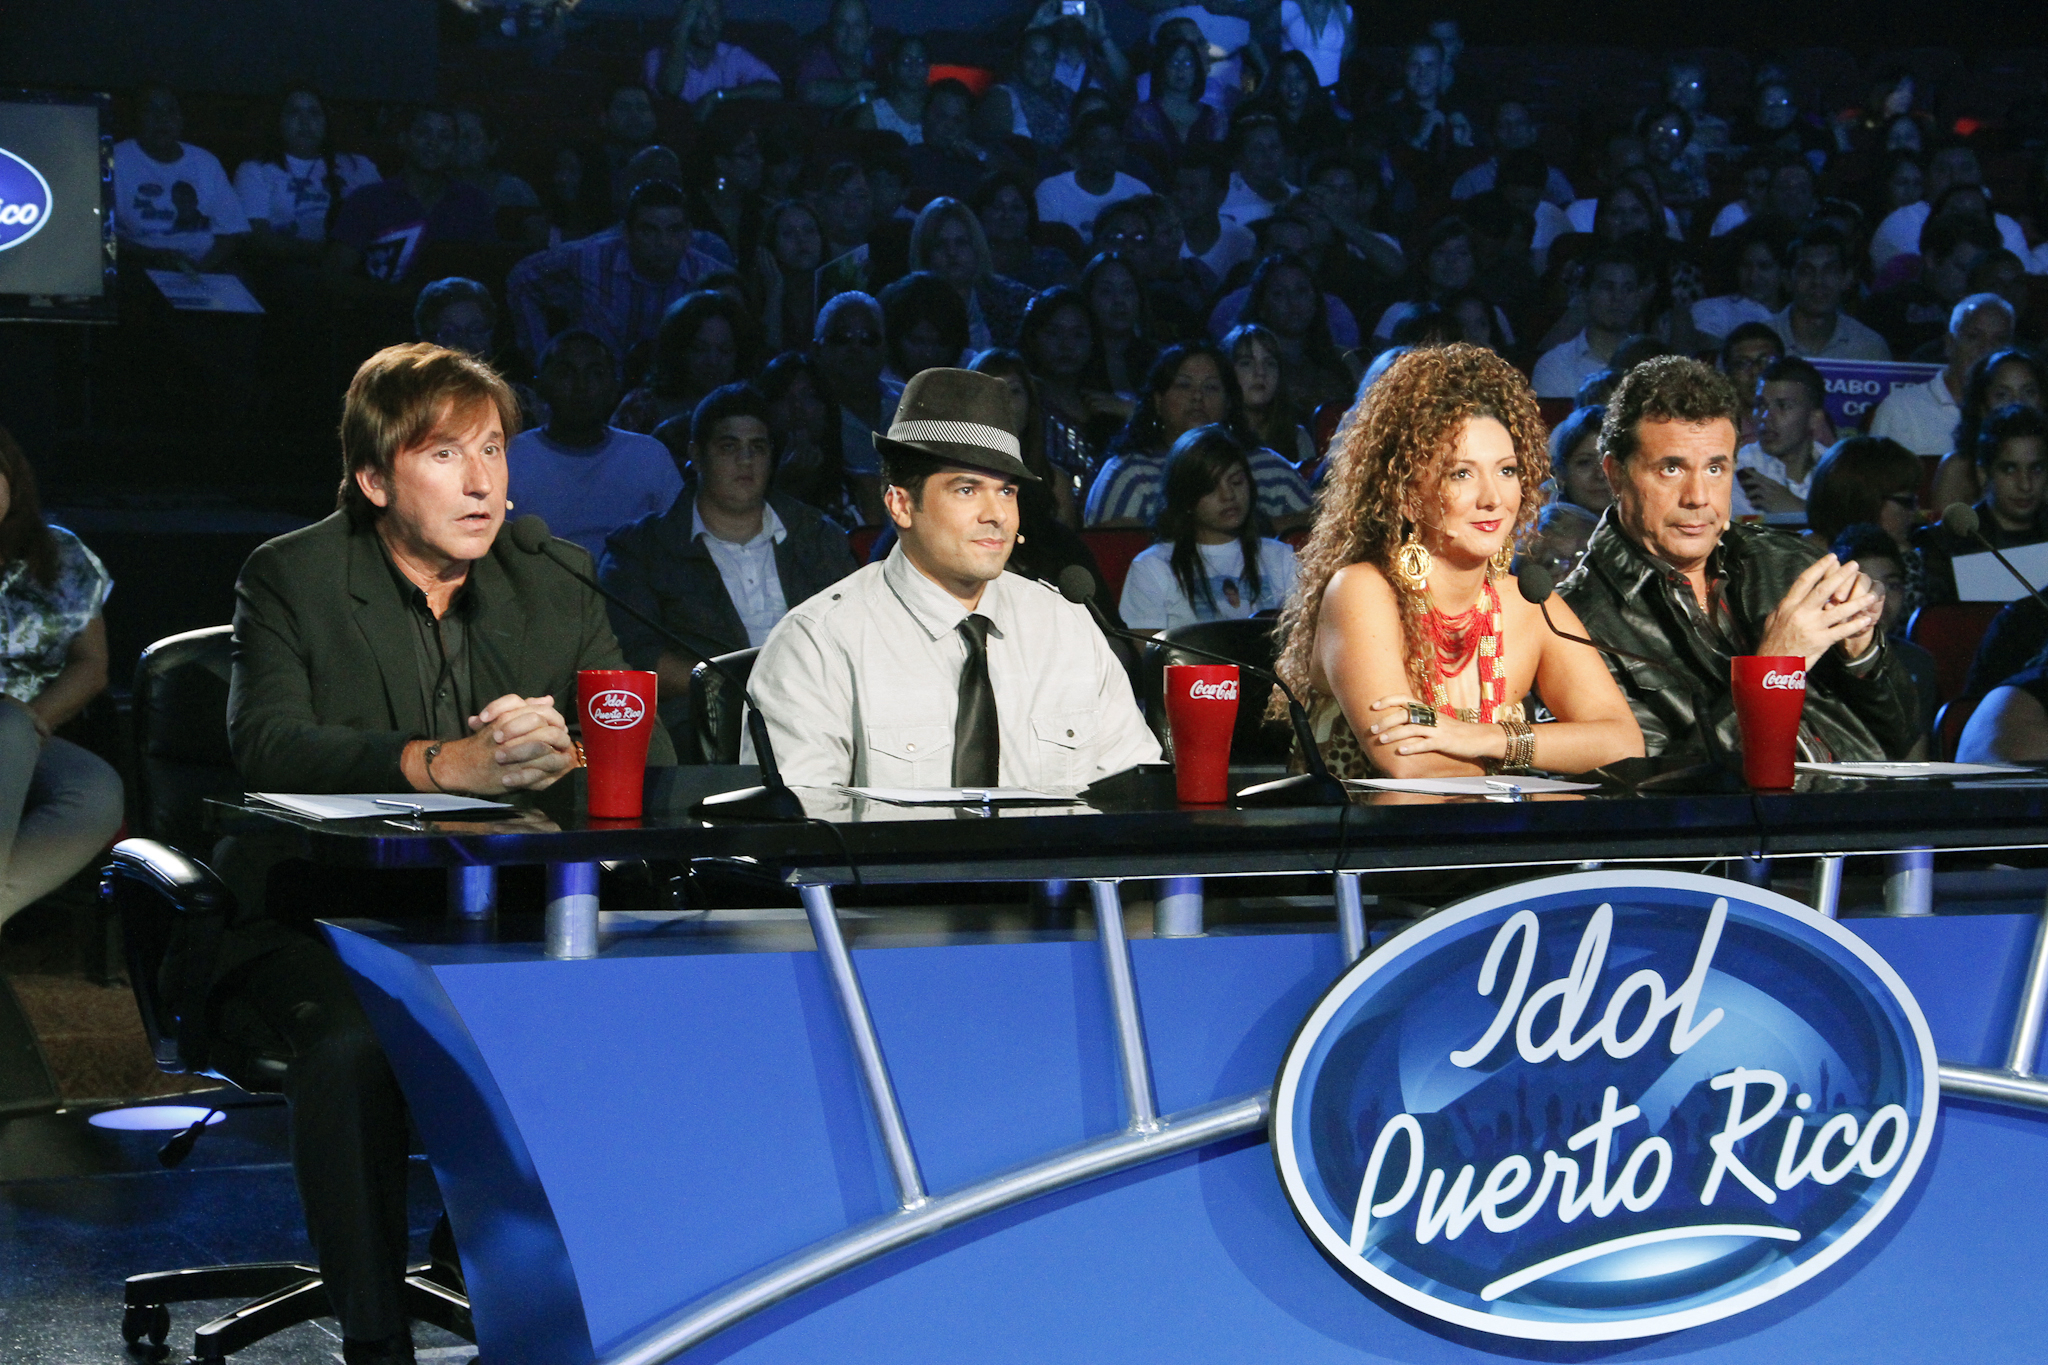 Idol Puerto Rico (2011) Celebrity Judge With Ricardo Montaner, Jerry Rivera and Topy Mamery